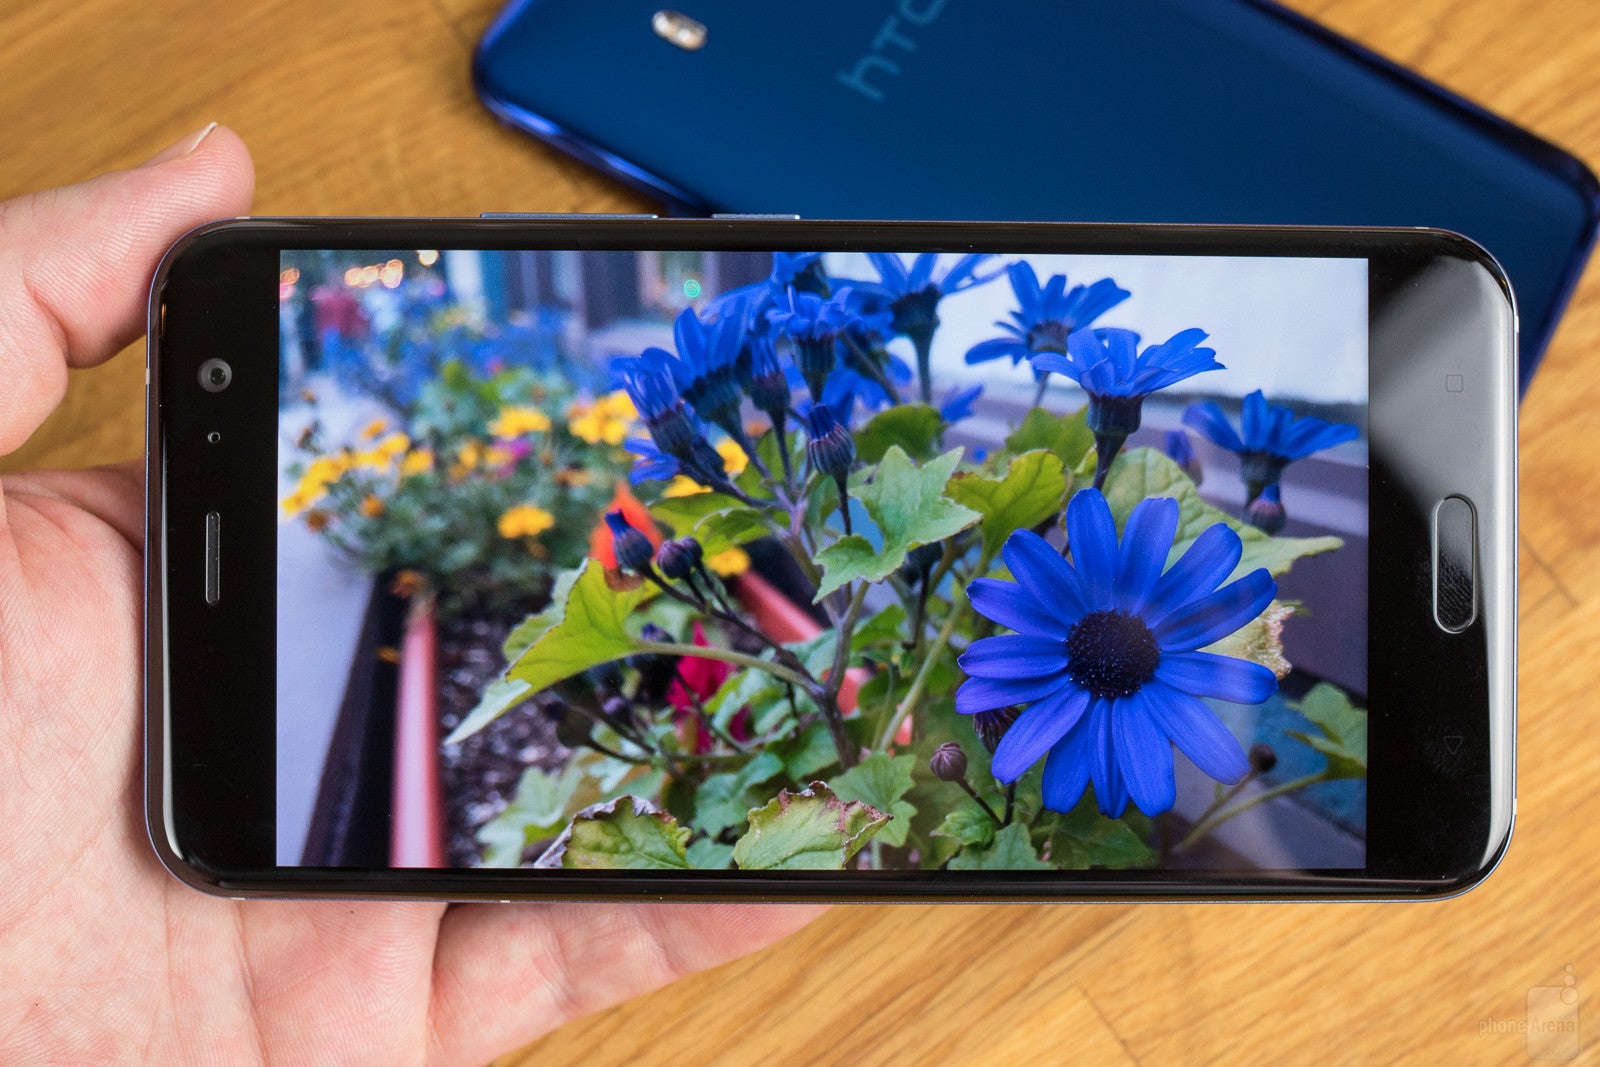 HTC U11 to score sRGB color space support, 1080p video recording at 60fps with future updates